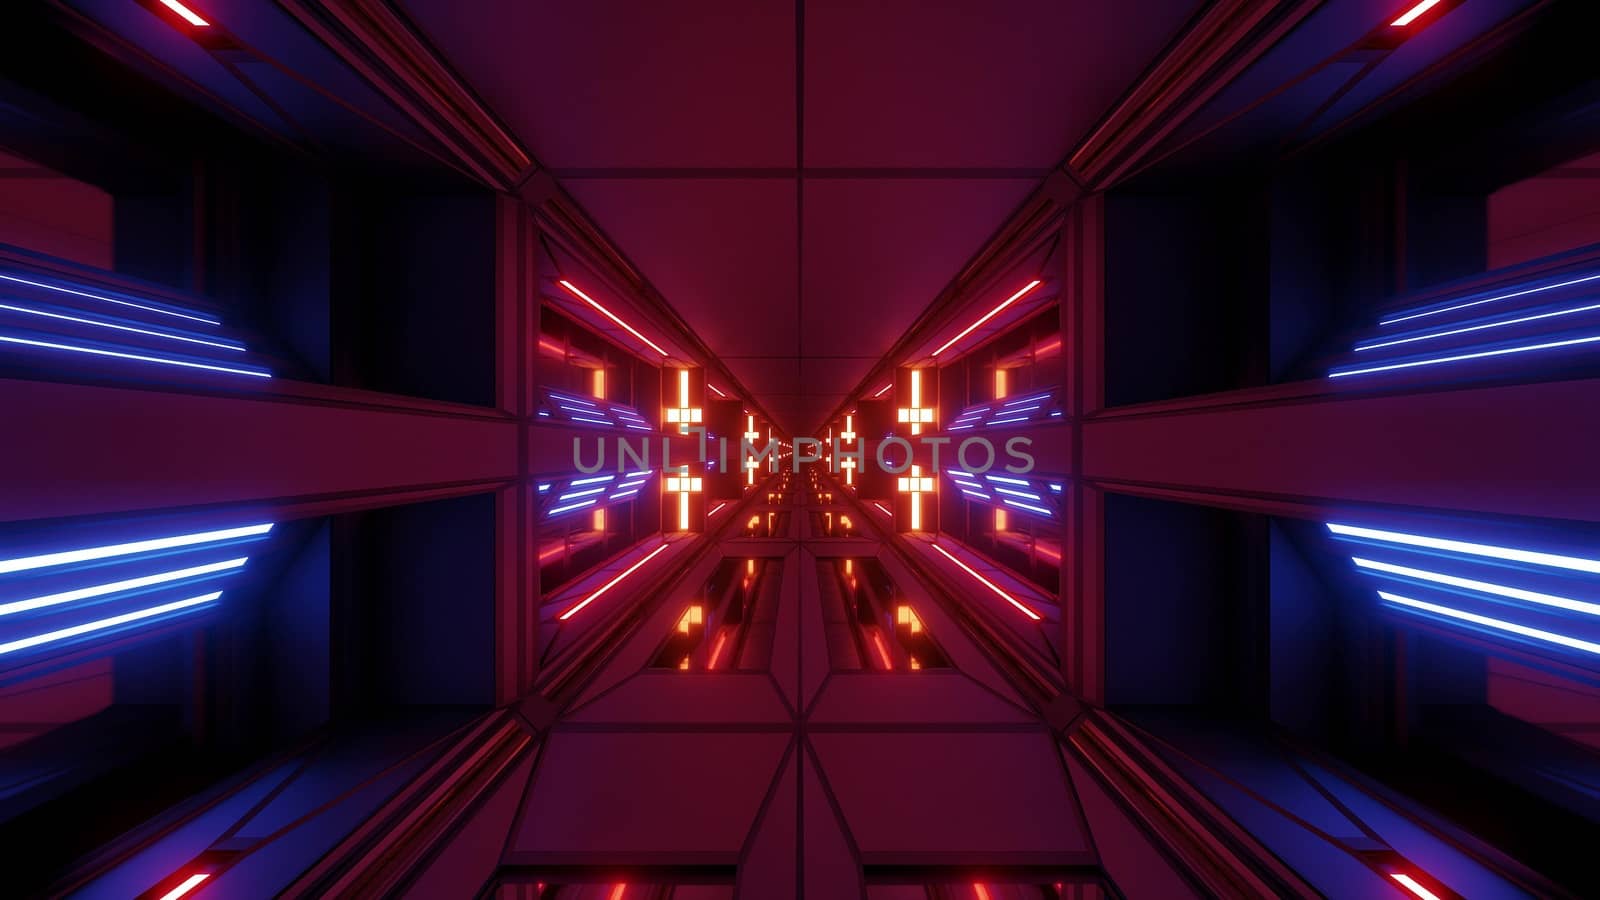 futuristic scifi space hangar tunnel corridor 3d illustration with holy christian cross background wallpaper, future sci-fi room 3d renderinng design